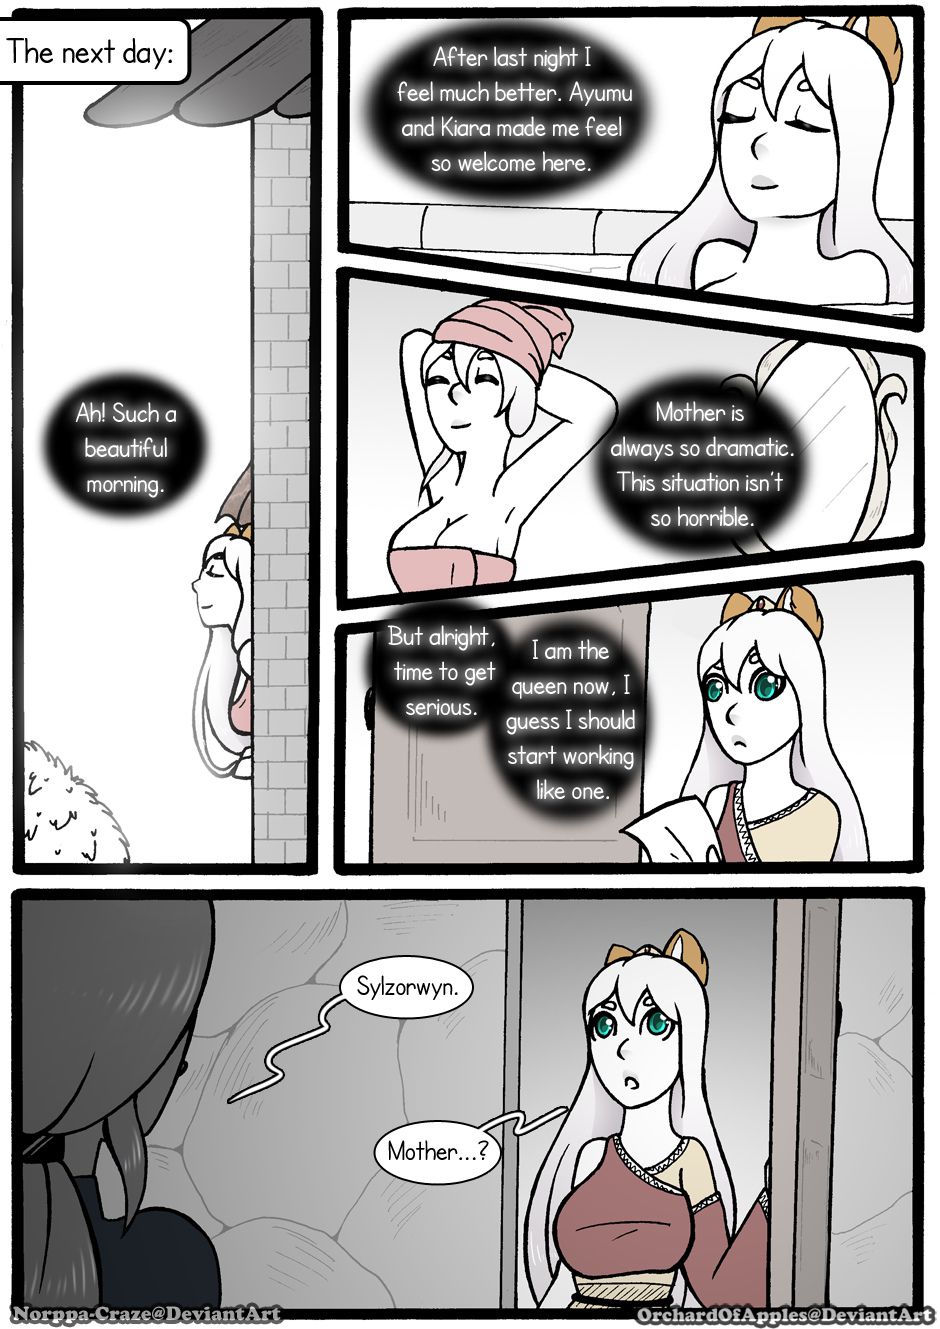 [Jeny-jen94] Between Kings and Queens [Ongoing] 270